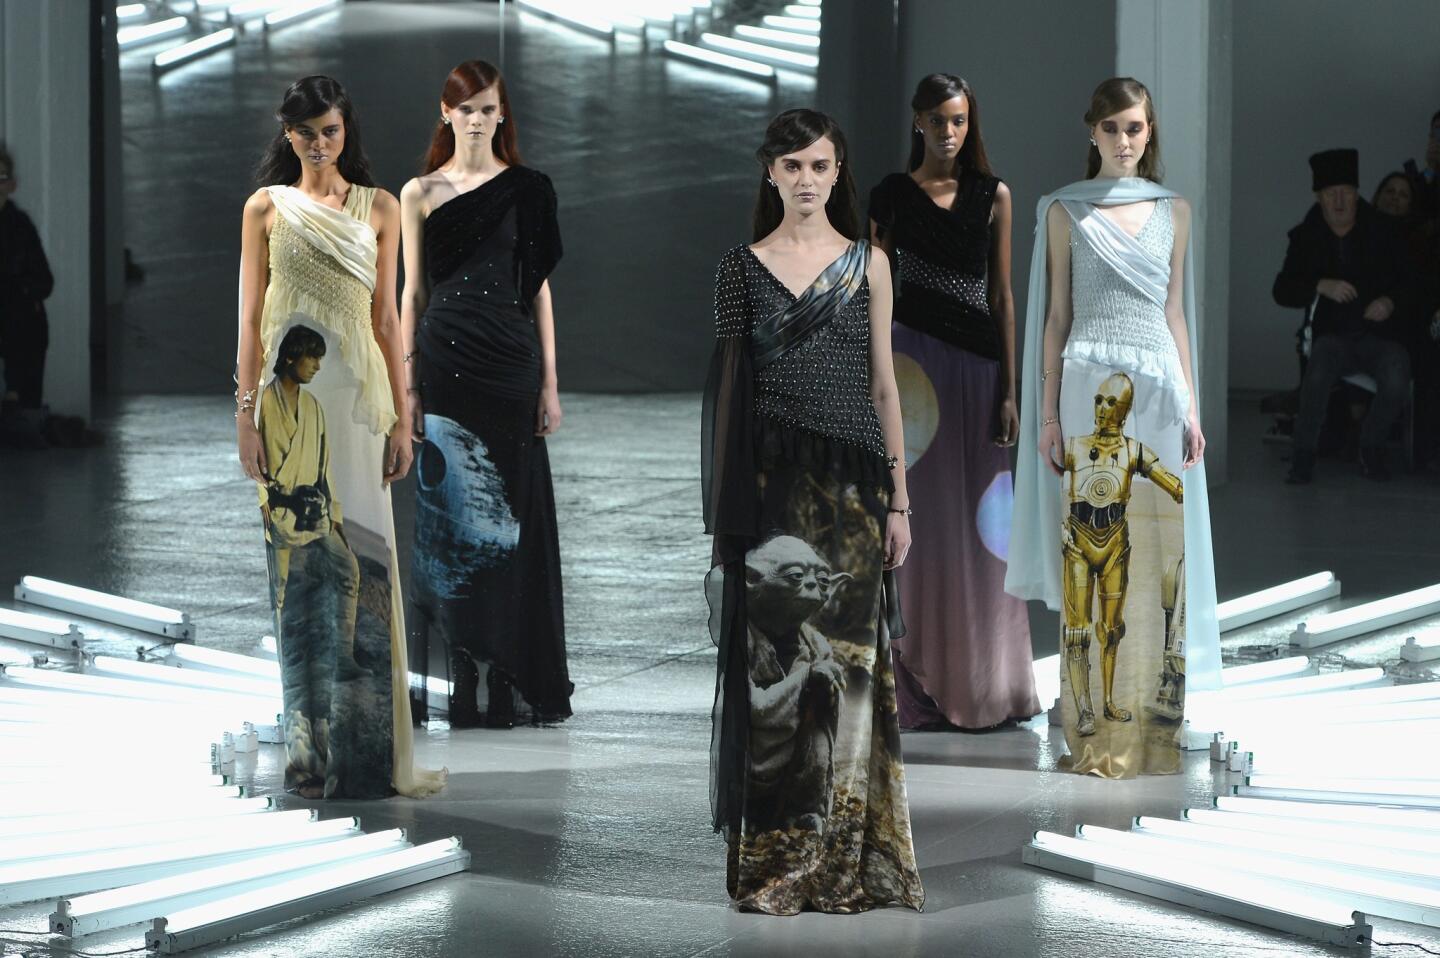 Rodarte's Fall 2014 Ready-to-Wear collection ended with Star Wars-printed gowns featuring Yoda and Luke Skywalker, among others and making for some great Instagrams.